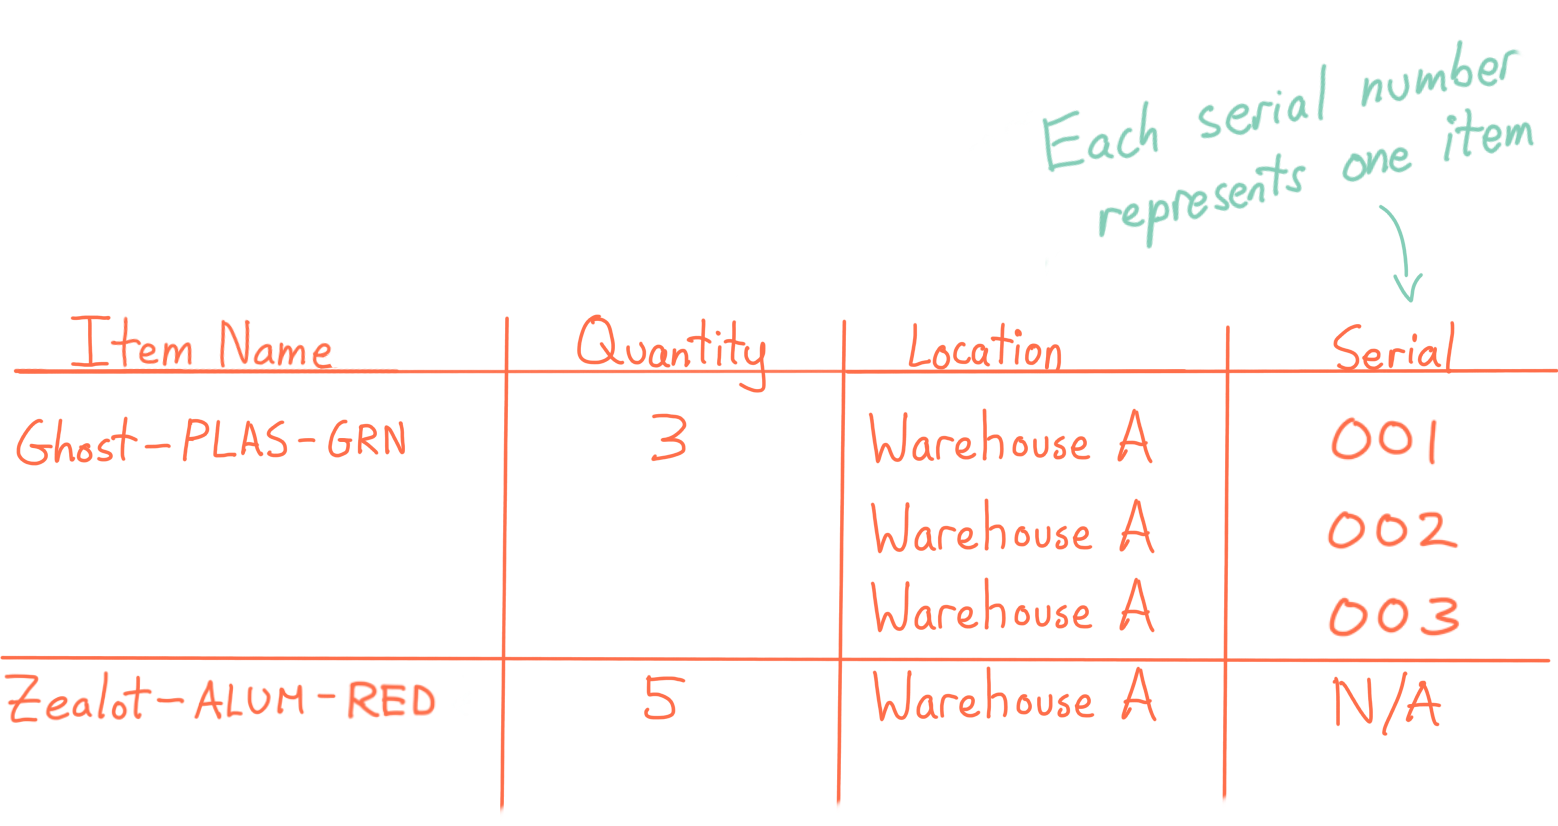 Drawing of a product list: showing item name, quantity, location, and a unique serial number for each serialized item